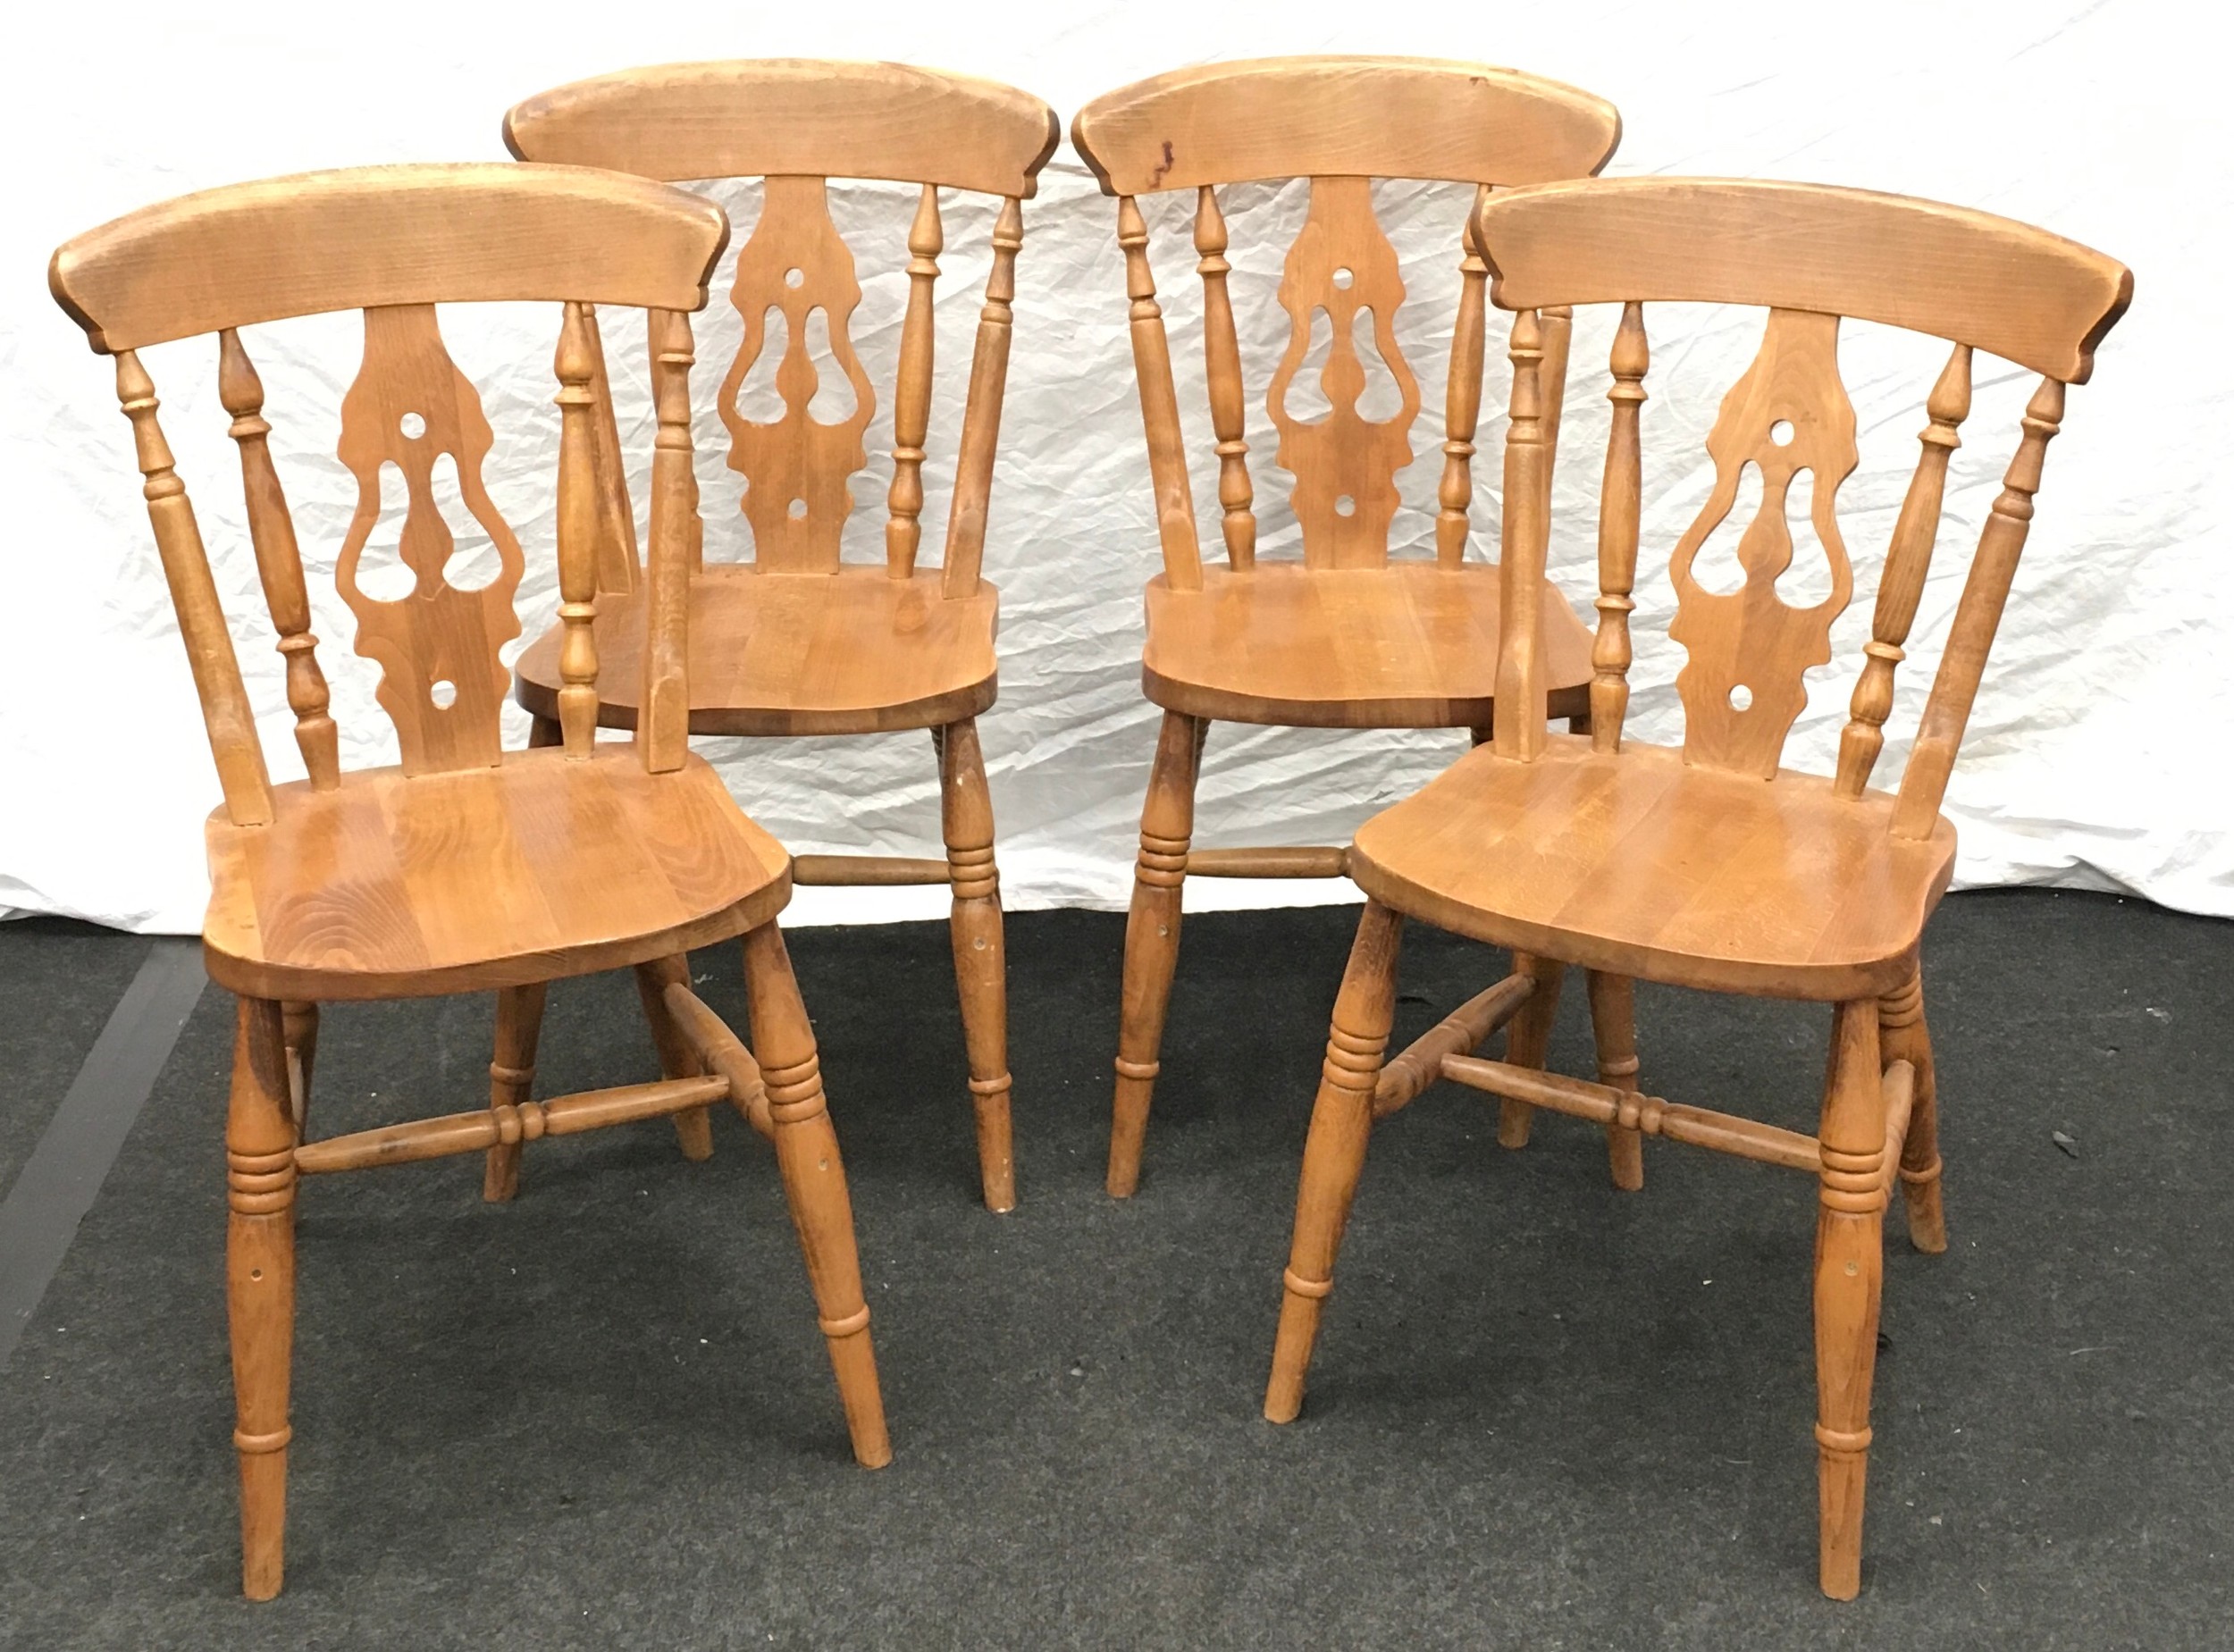 Set 4 elm seat farmhouse chairs with lira back on turned ring support and cross stretcher 90x45x45cm